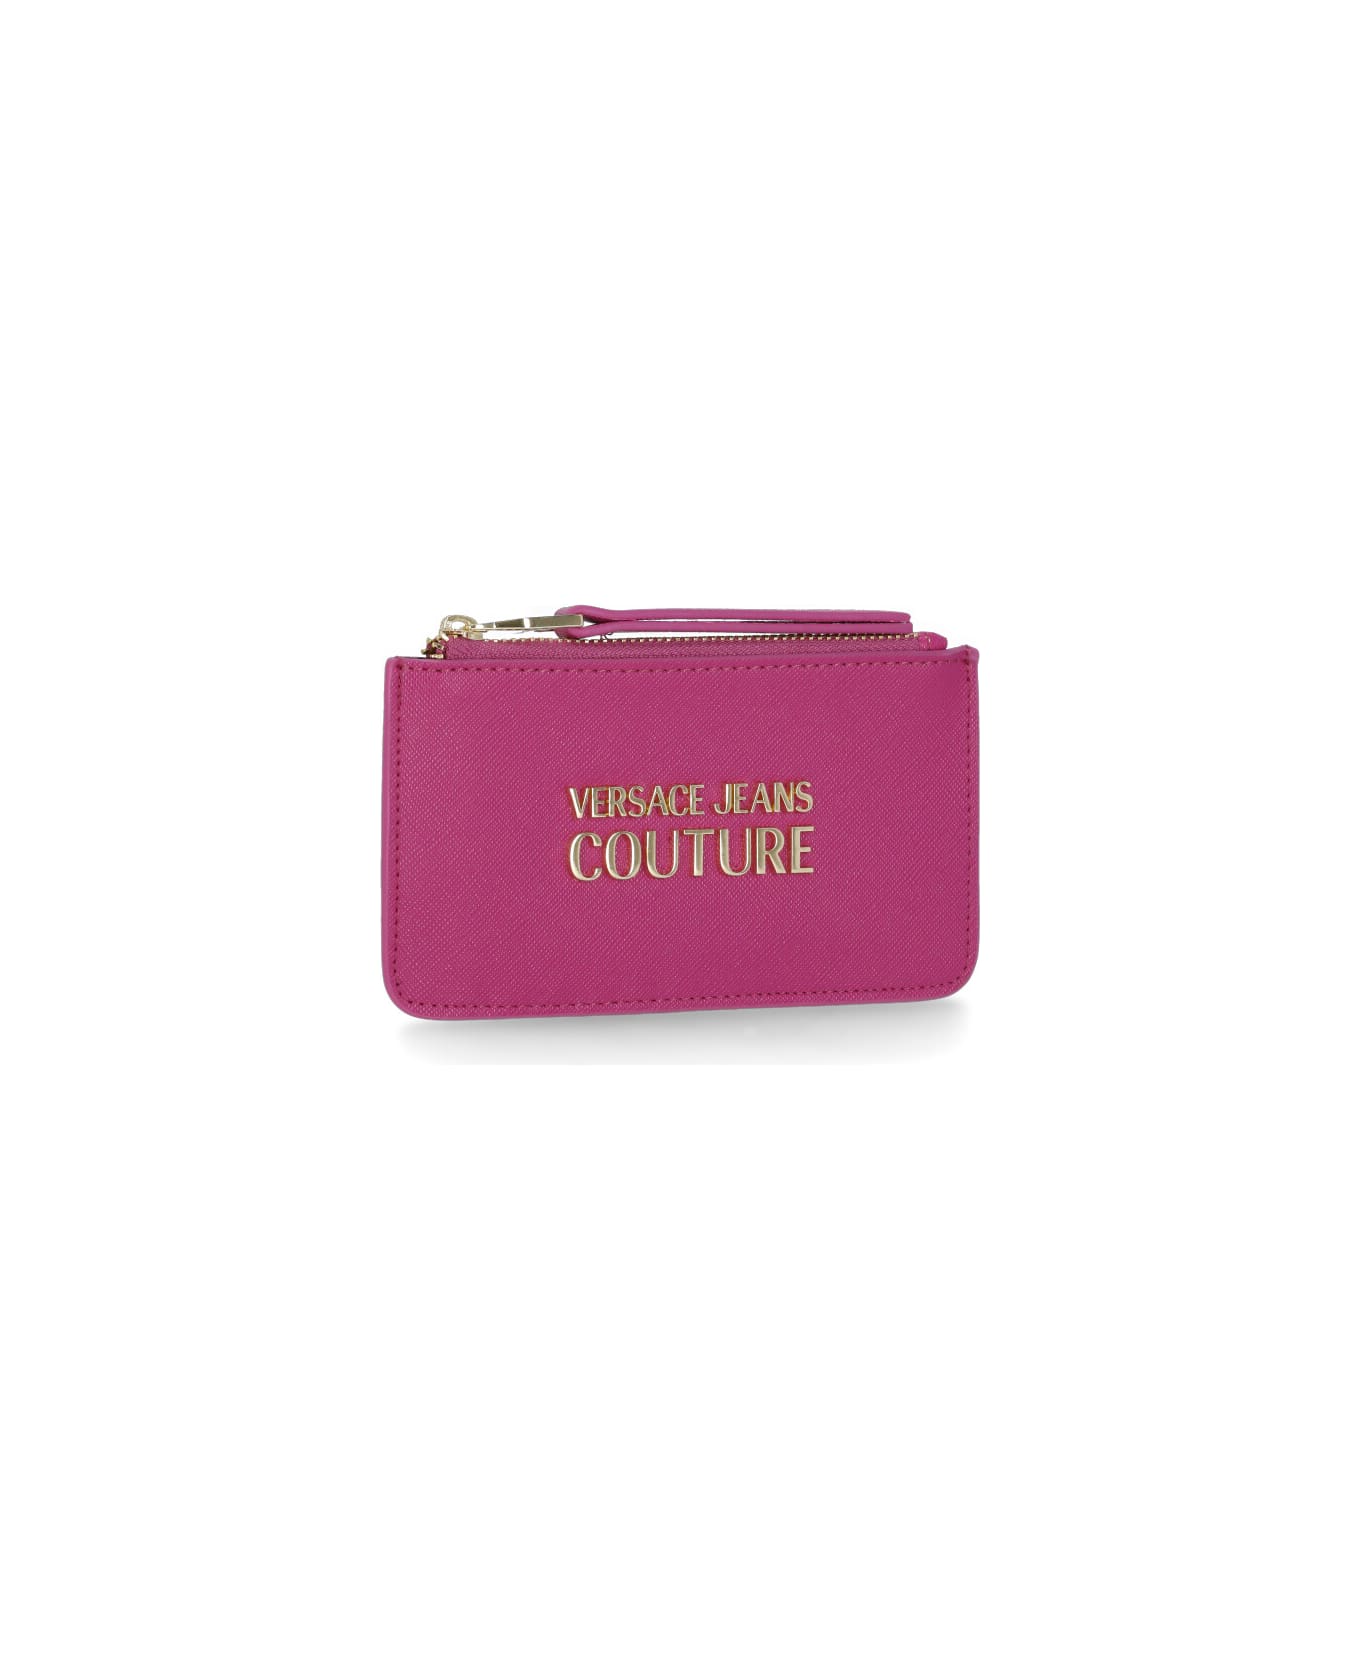 Versace Jeans Couture Card Holder With Logo - Fuchsia